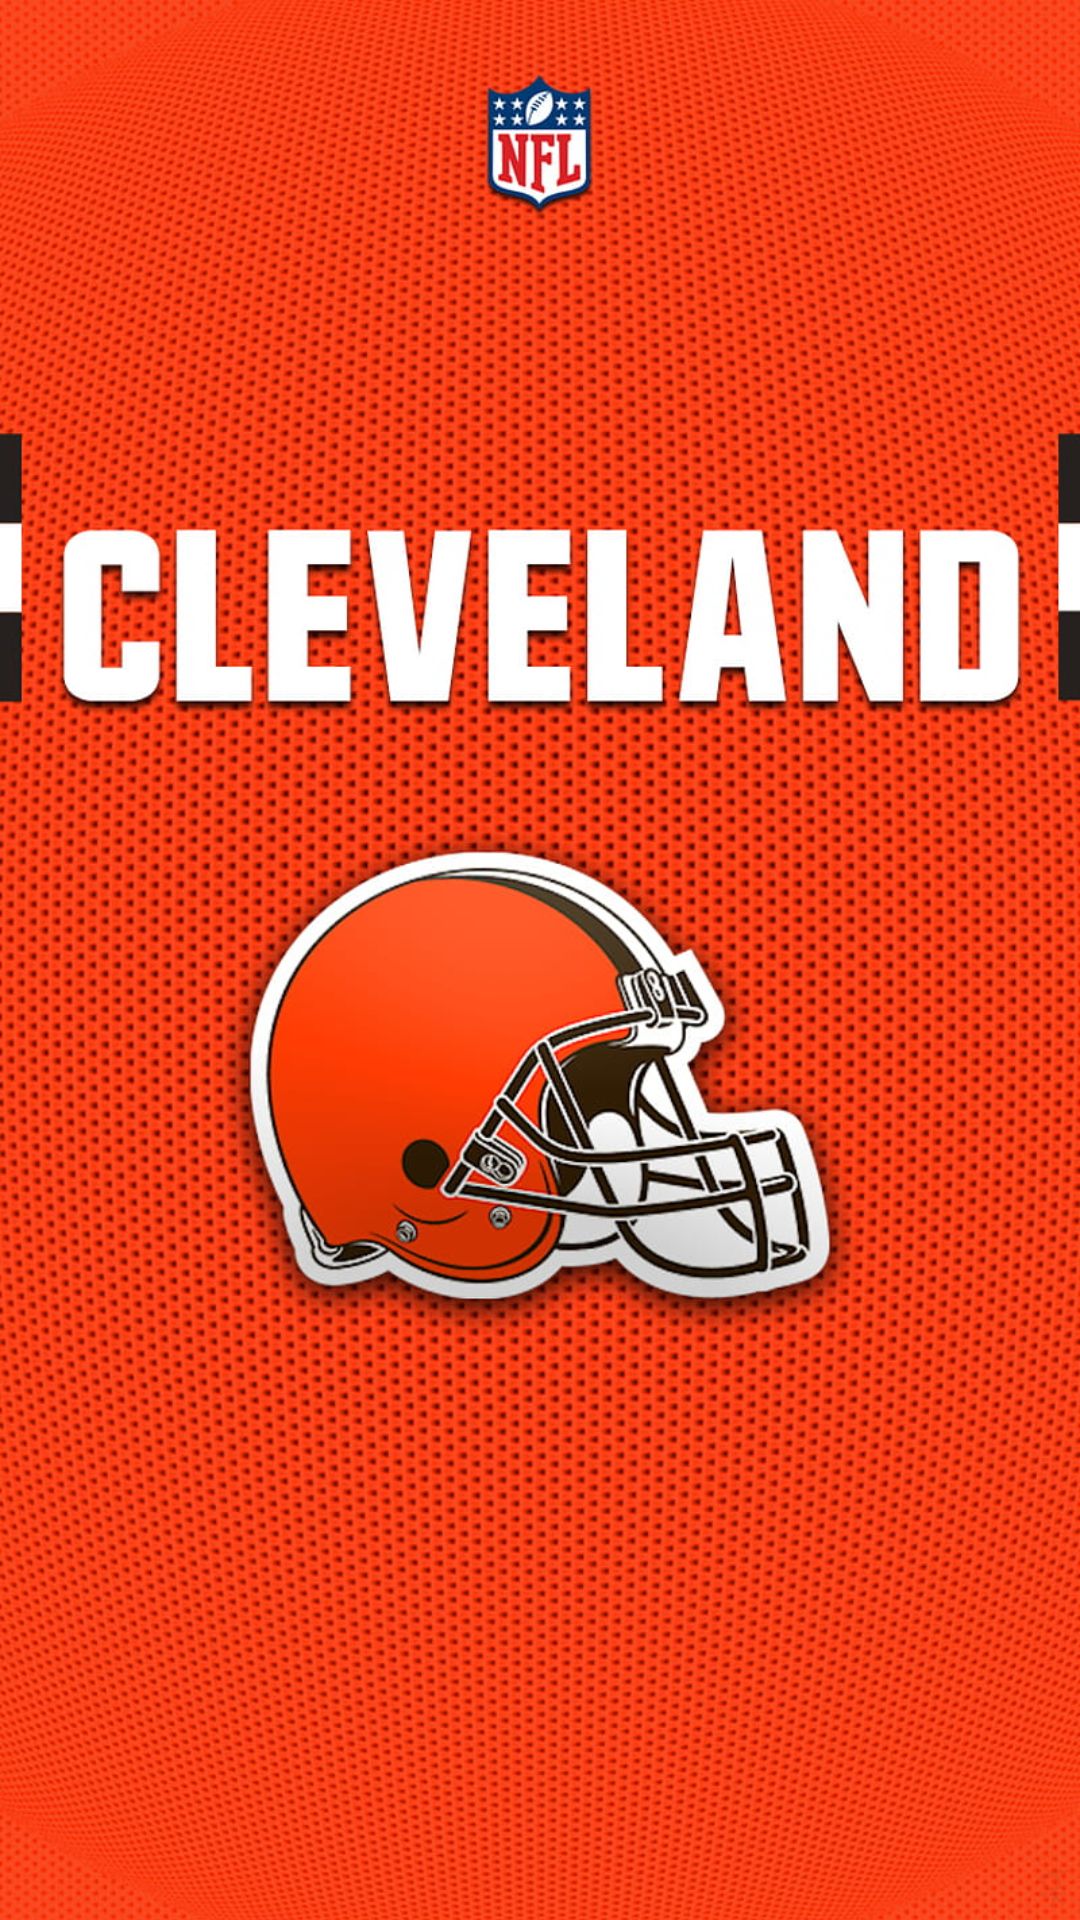 Cleveland Browns Backgrounds